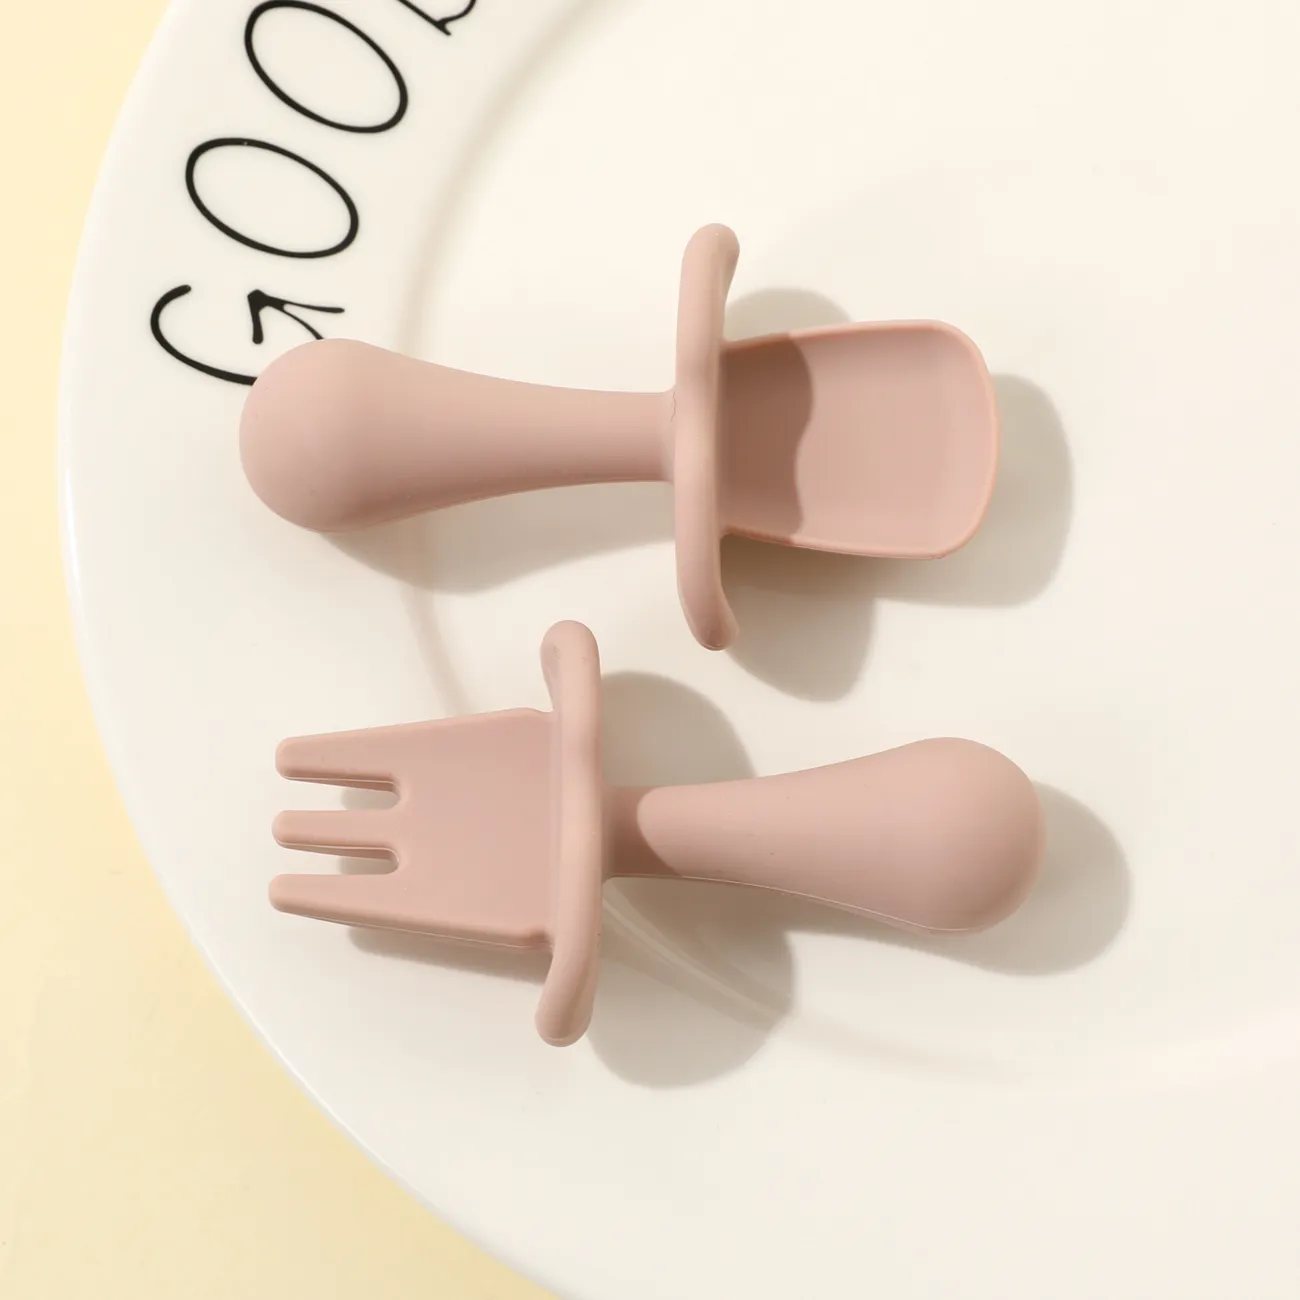 Silicone Baby Feeding Set Includes Spoons & Forks Infant Newborn Utensil Set for Self-Training Dark Pink big image 1